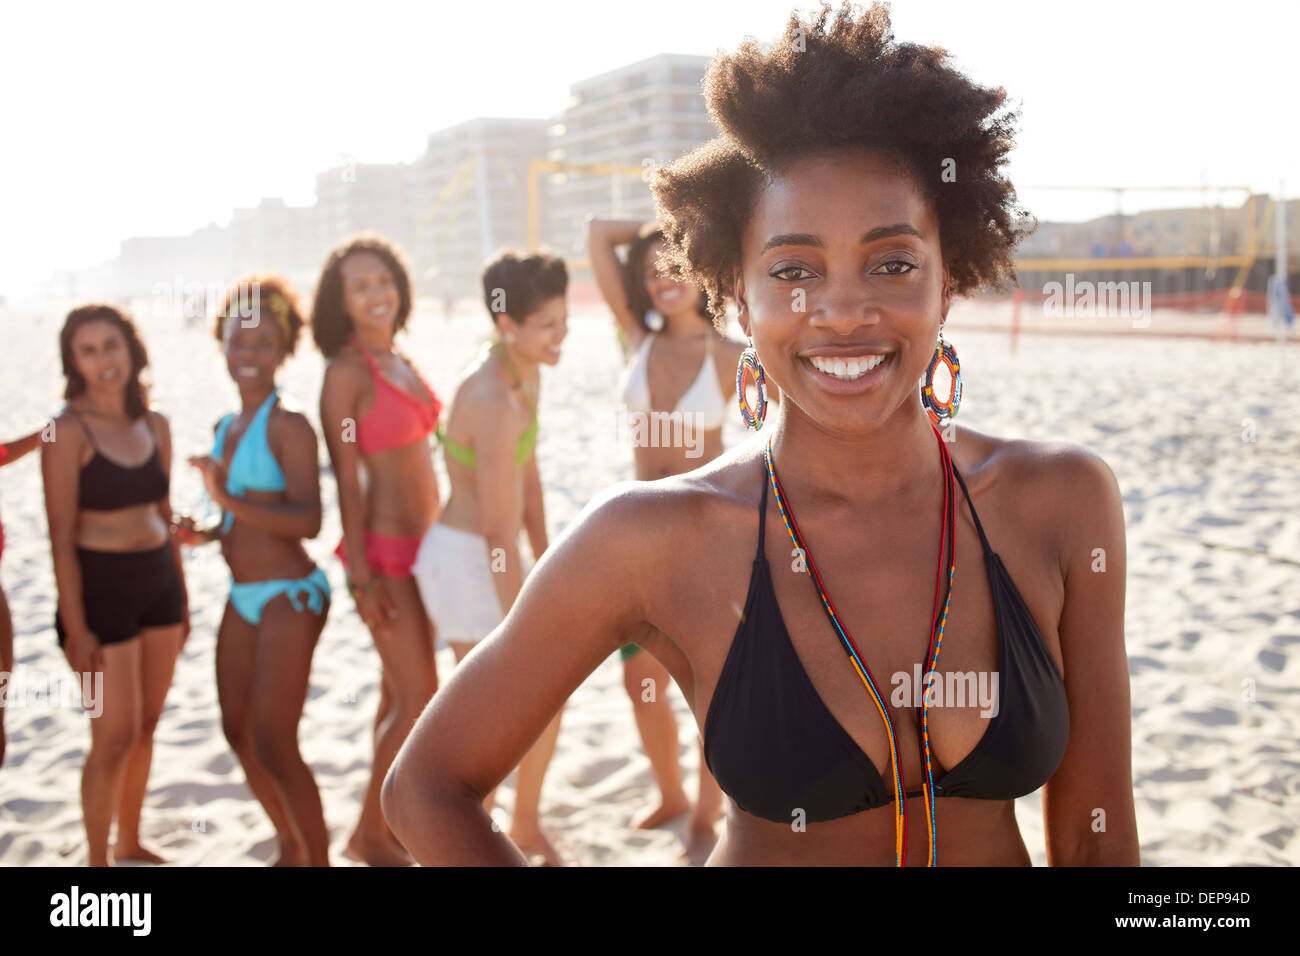 Women smiling together on beach Stock Photo